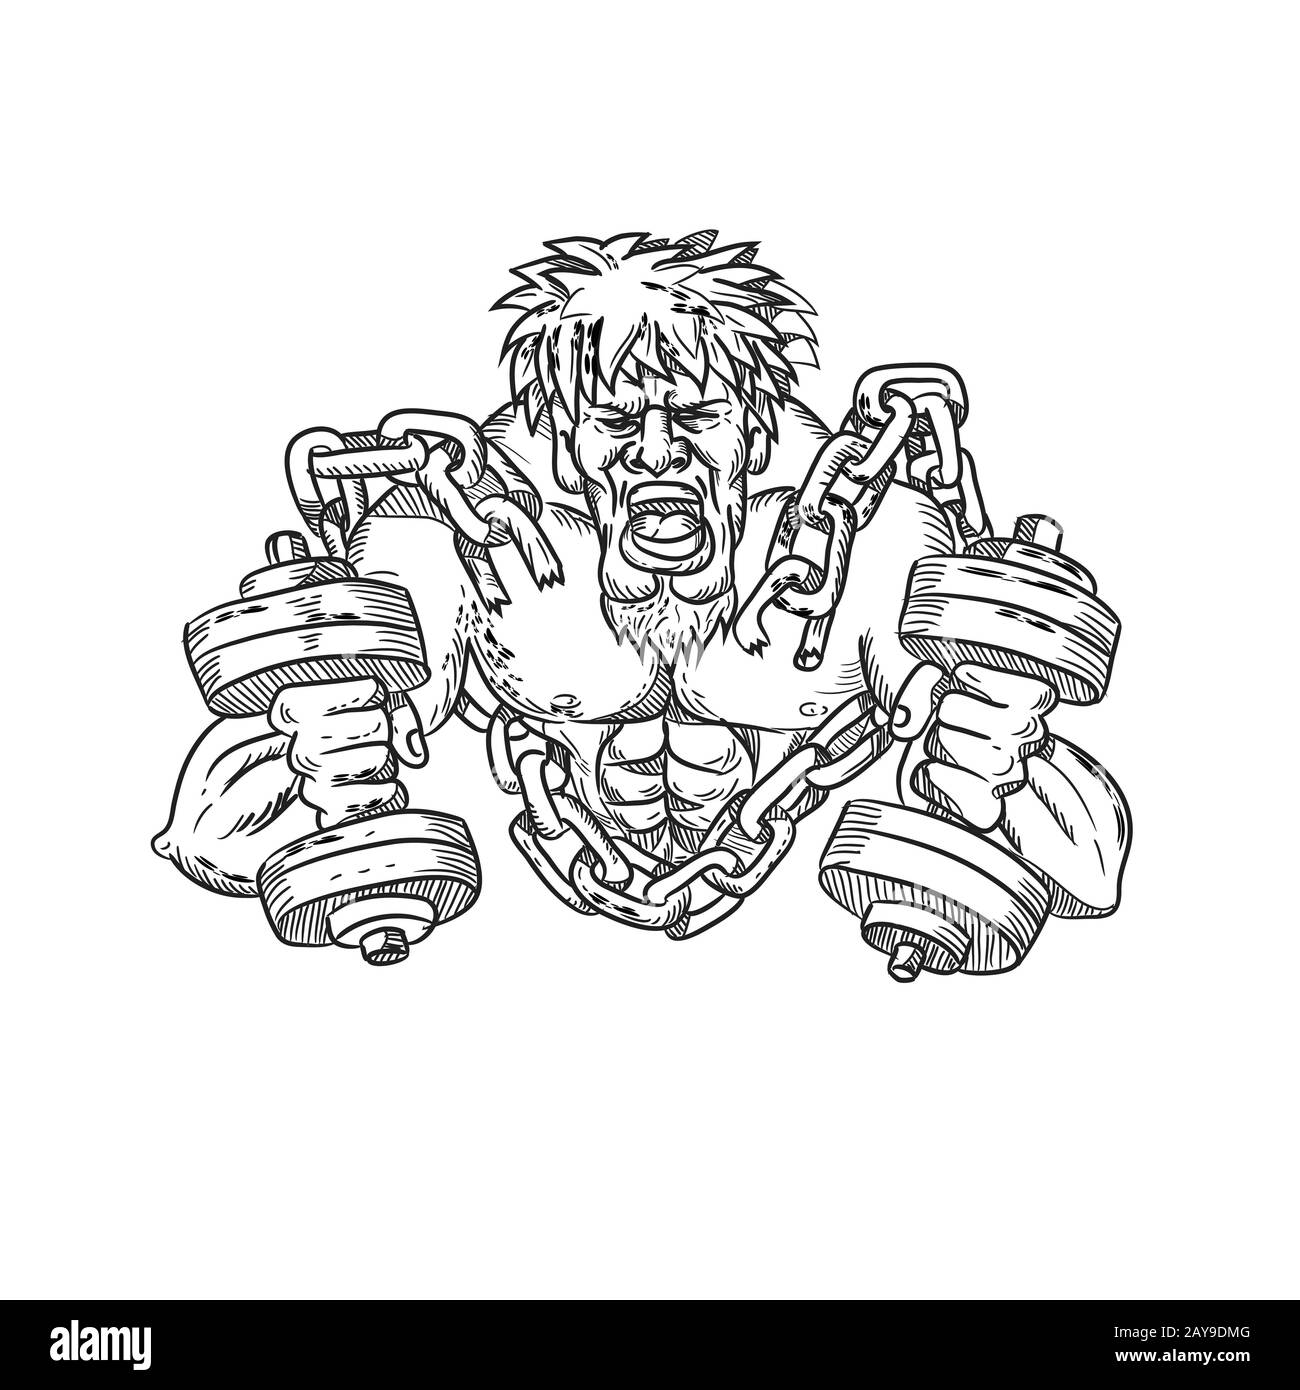 Buffed Athlete Dumbbells Breaking Free From Chains Drawing Stock Photo -  Alamy